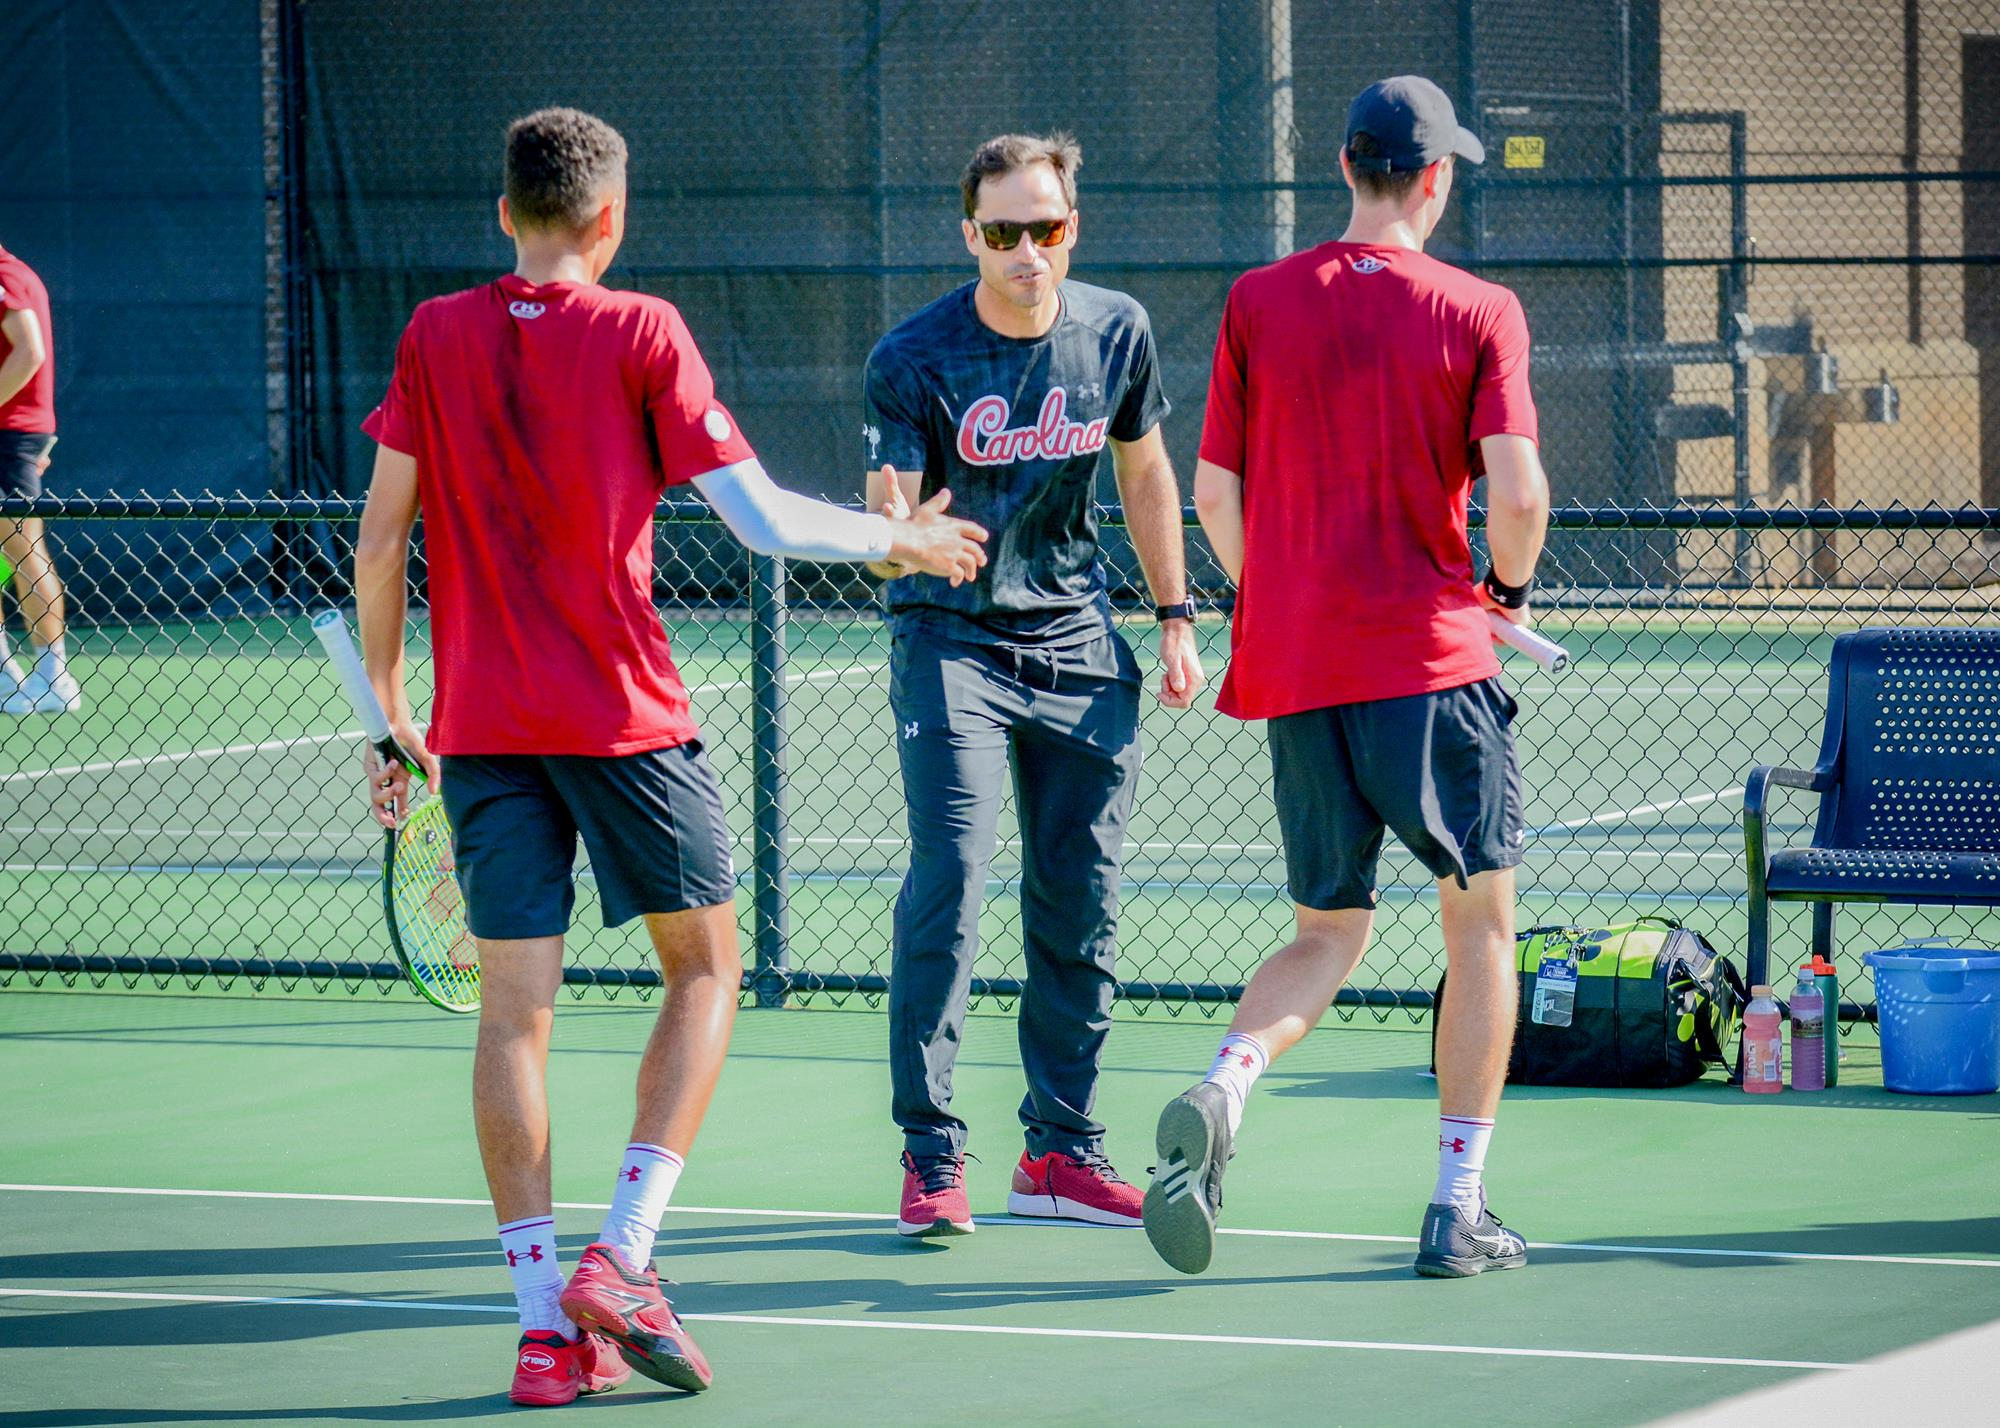 Gamecocks Up to No. 18 in ITA Rankings